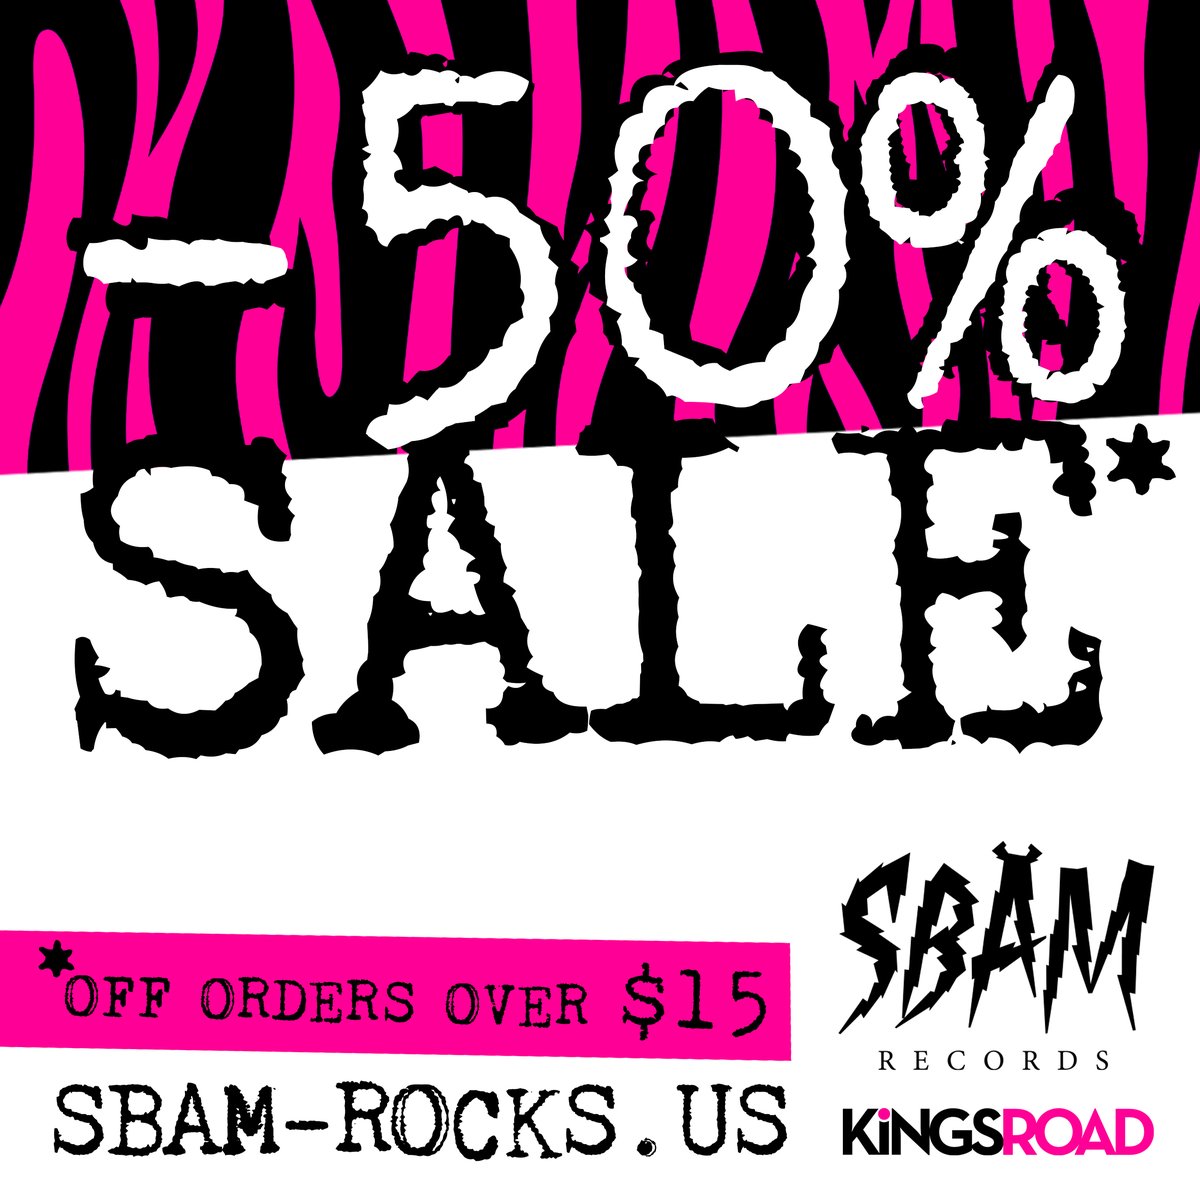 LAST CHANCE!!! Sale ends tomorrow midnight! So if you wanna grab stuff 60% or 50% reduced? Do it now!🤘 SBAM EU Sale: eu.sbam.rocks Kingsroad US Sale: sbam-rocks.us Kingsroad EU Sale: eu.kingsroadmerch.com/sbam-records/